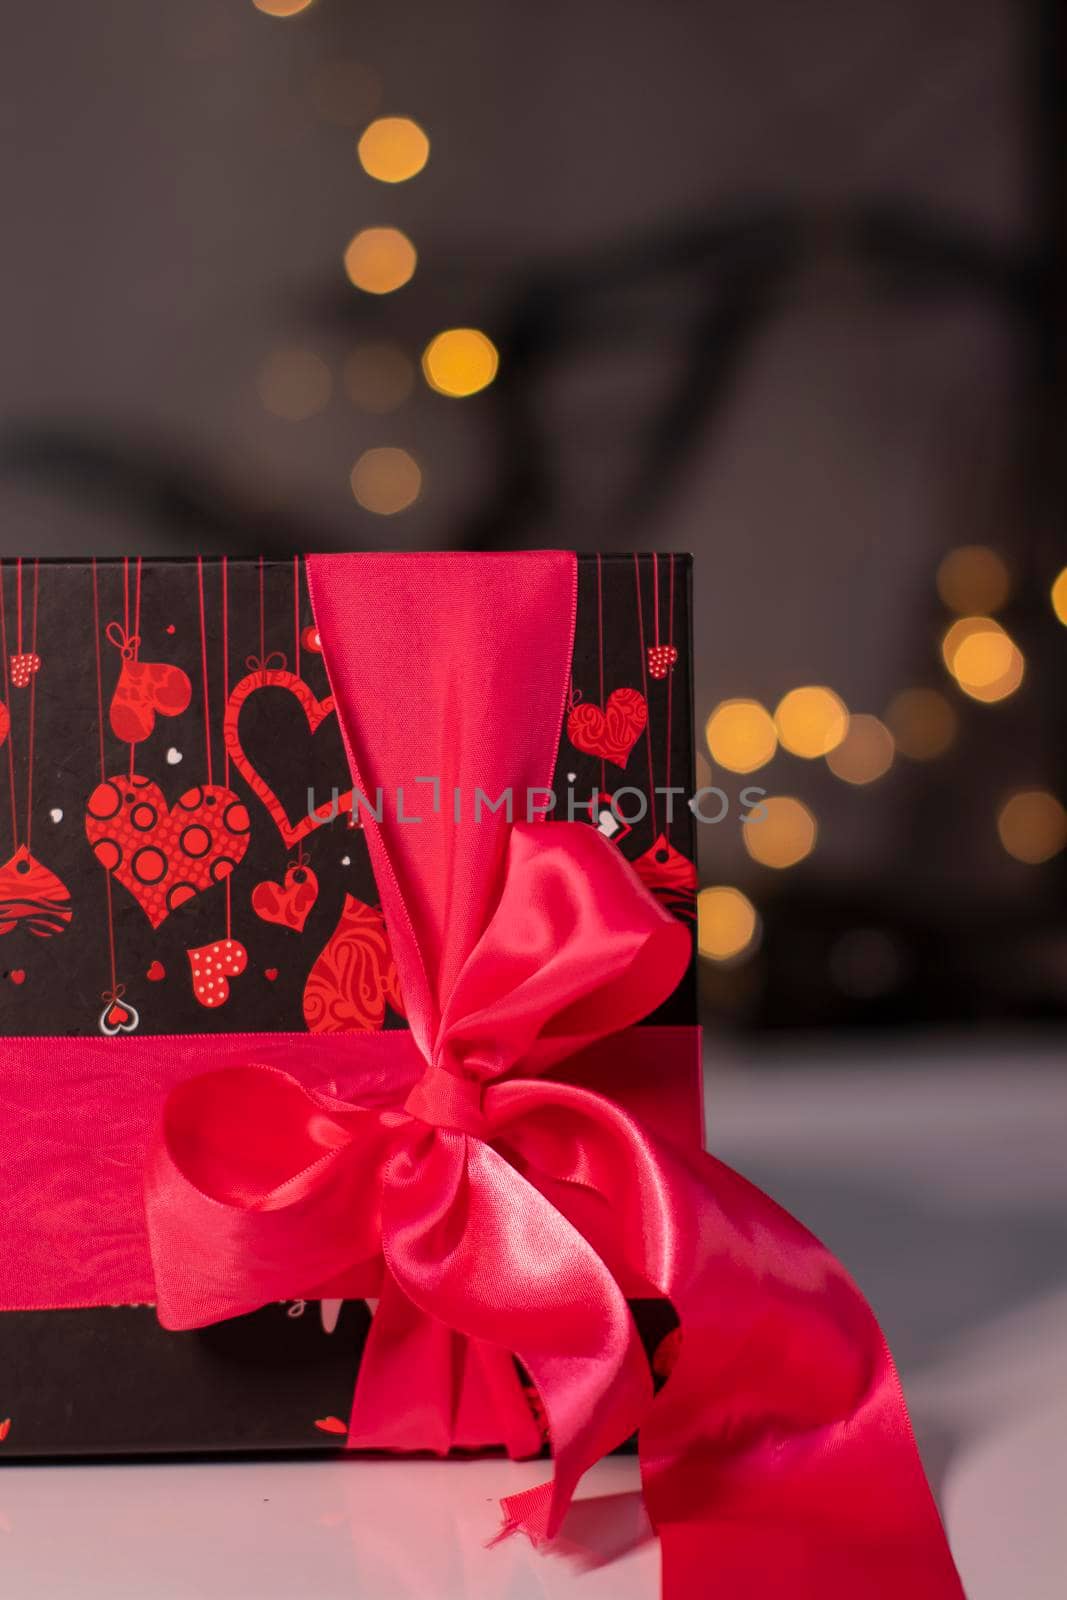 black with hearts gift box with pink ribbon bow on gold bokeh background by oliavesna